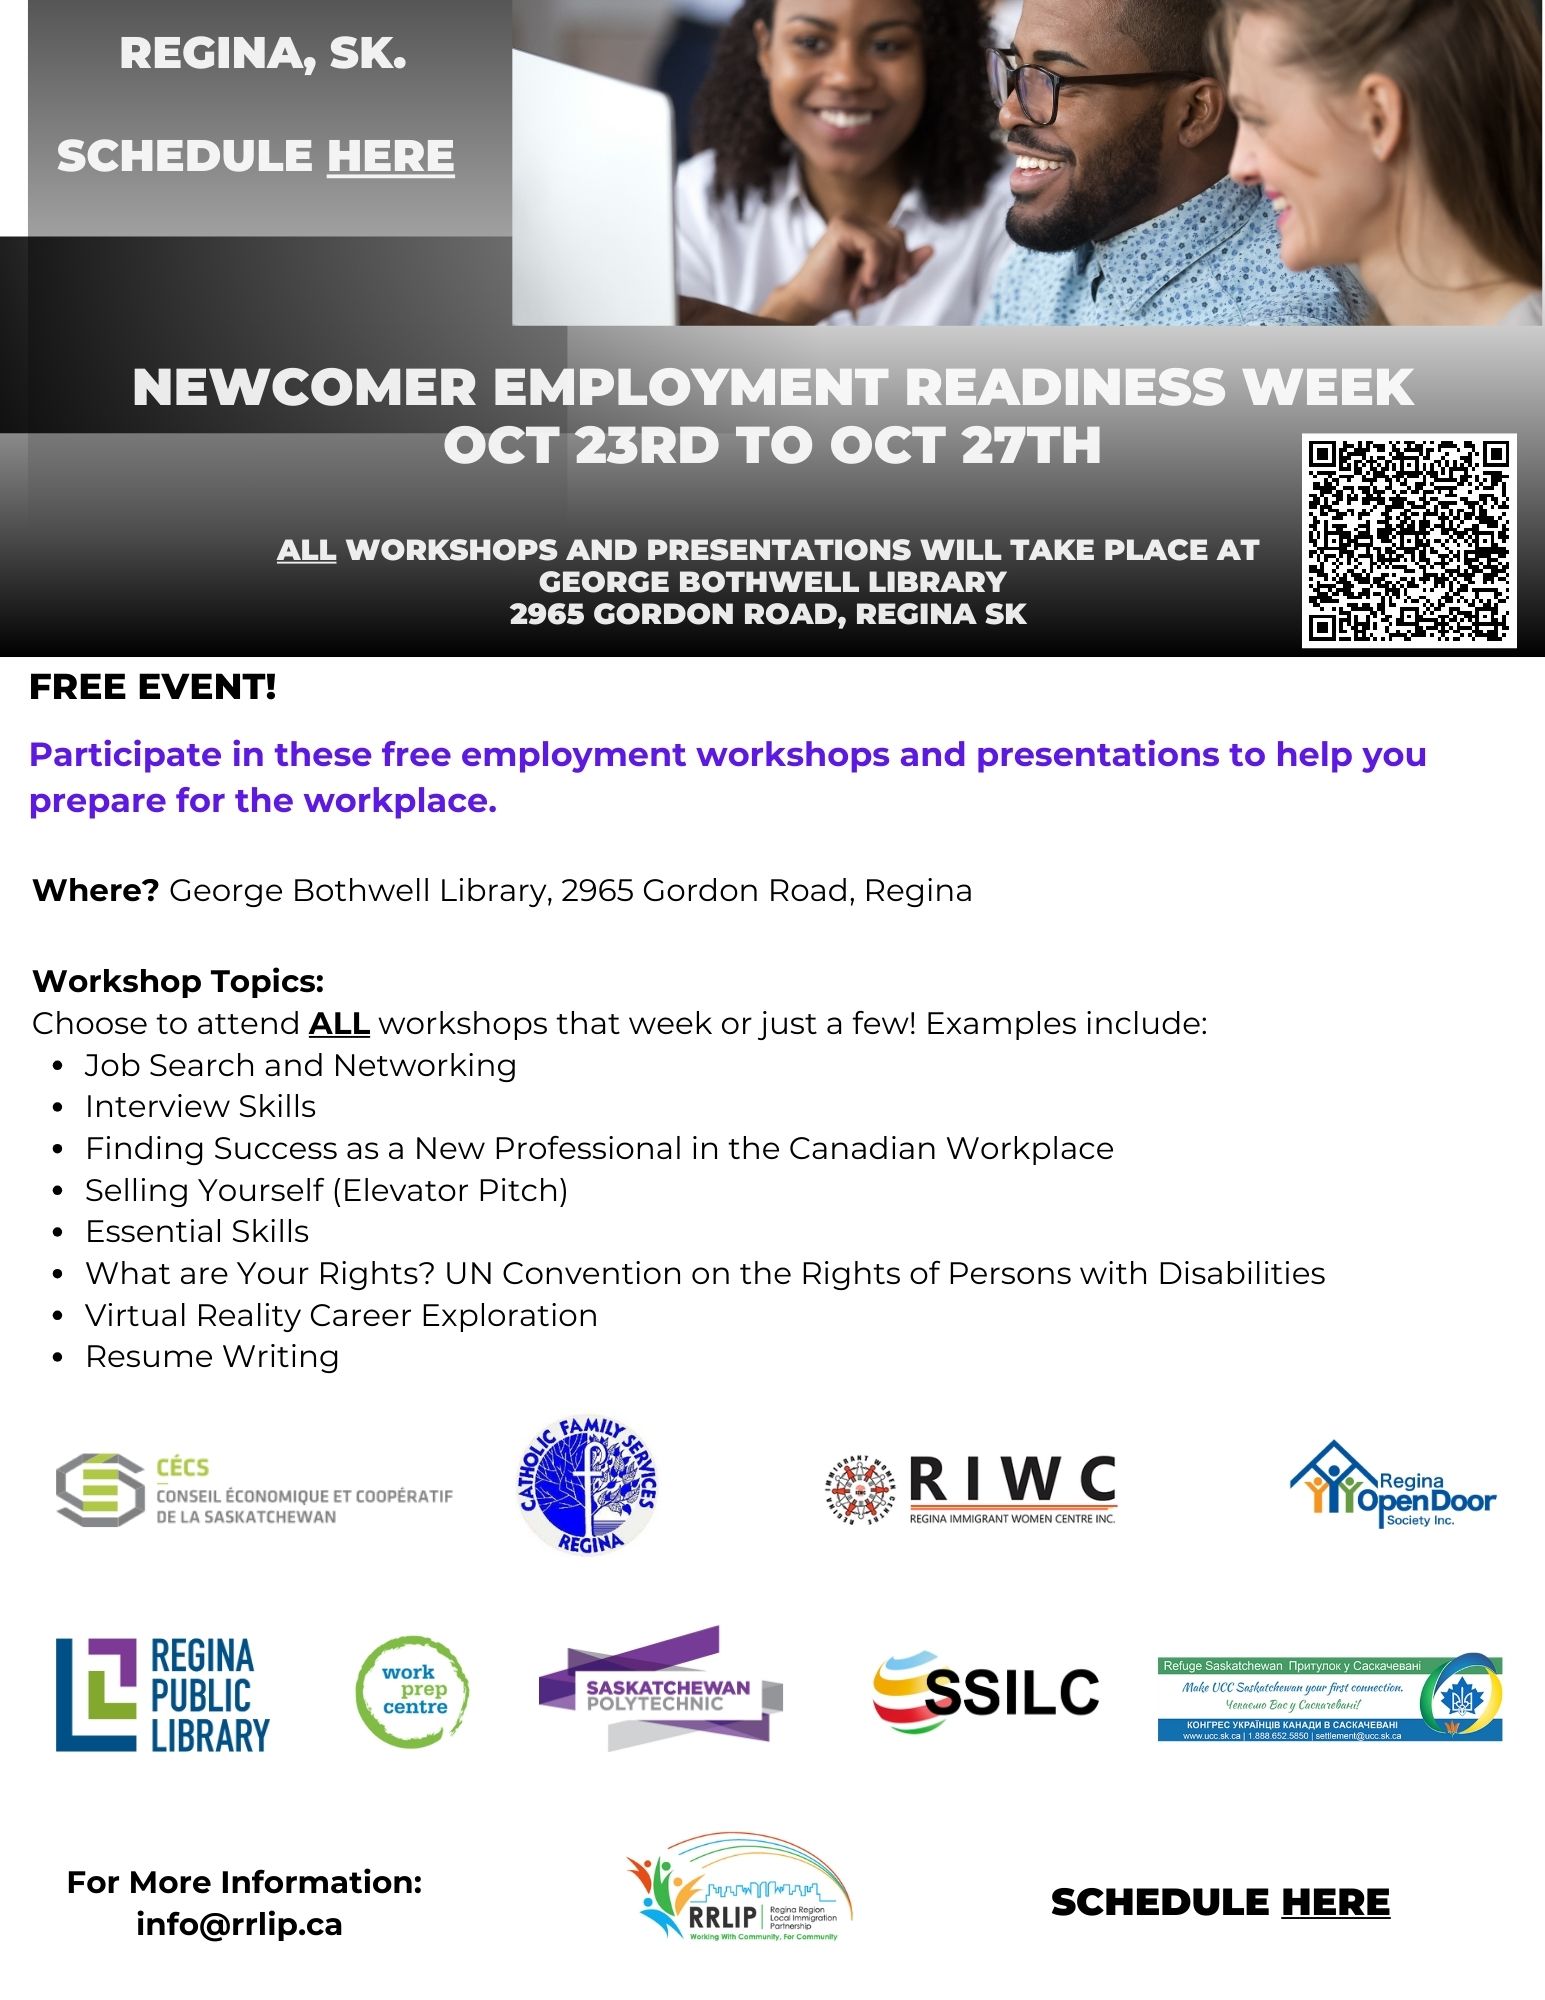 _Newcomer Employment Readiness Week with QR Code (1) (002)